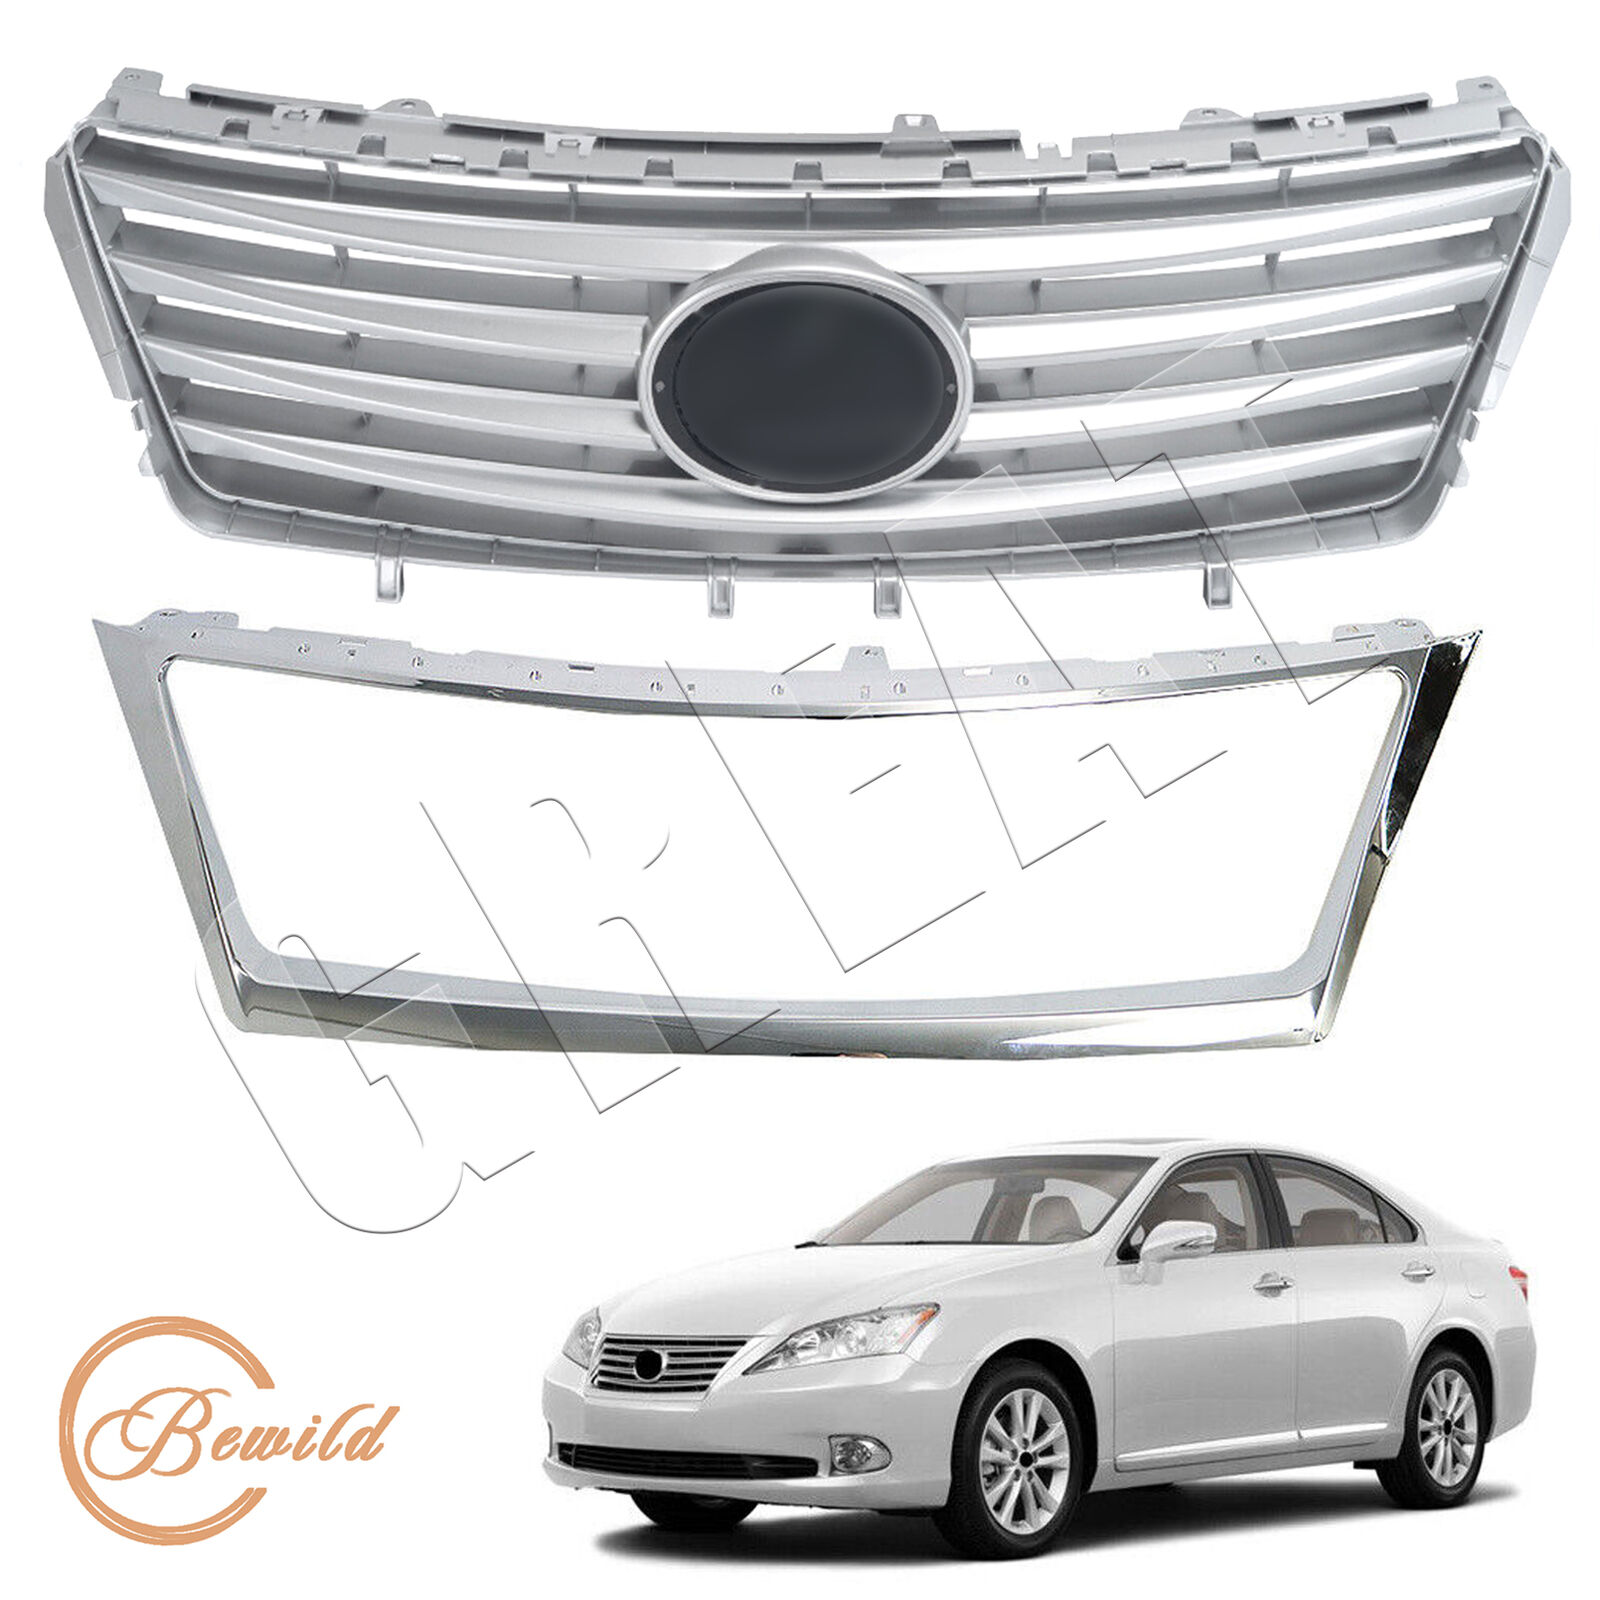 For 2010-2012 Lexus ES350 Front Bumper Upper Grille & Grill with Chrome Molding